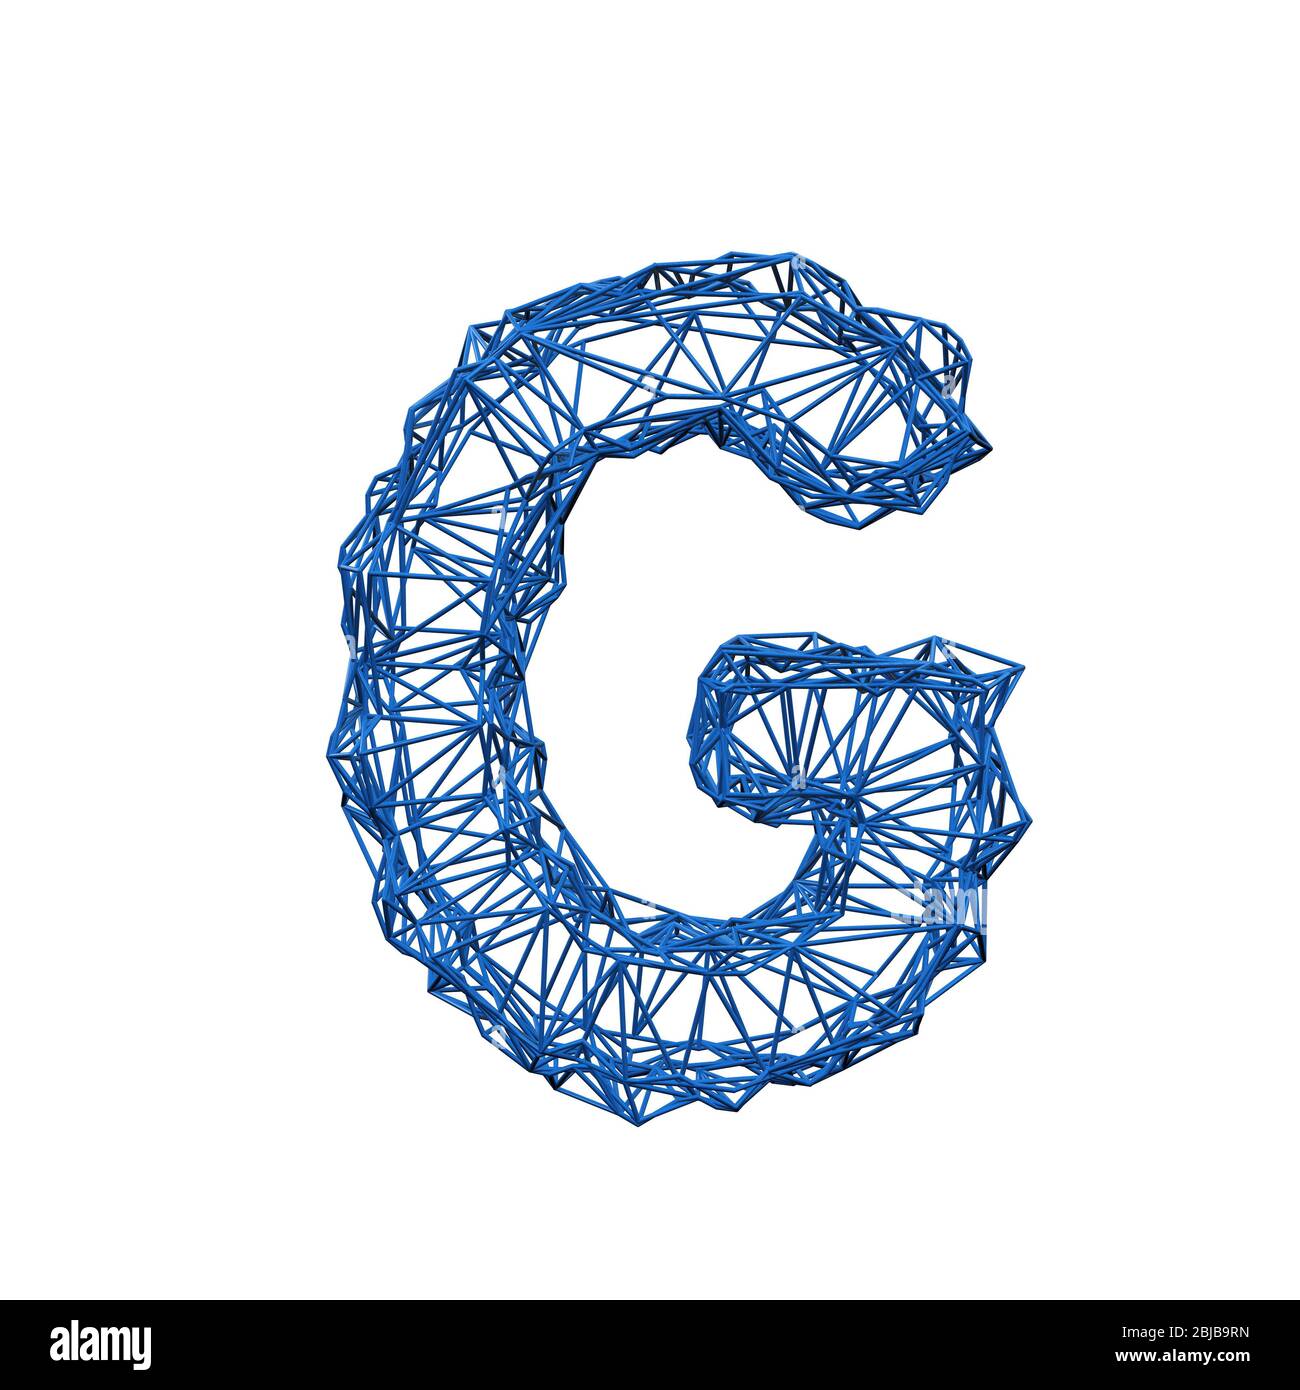 the letter g in blue